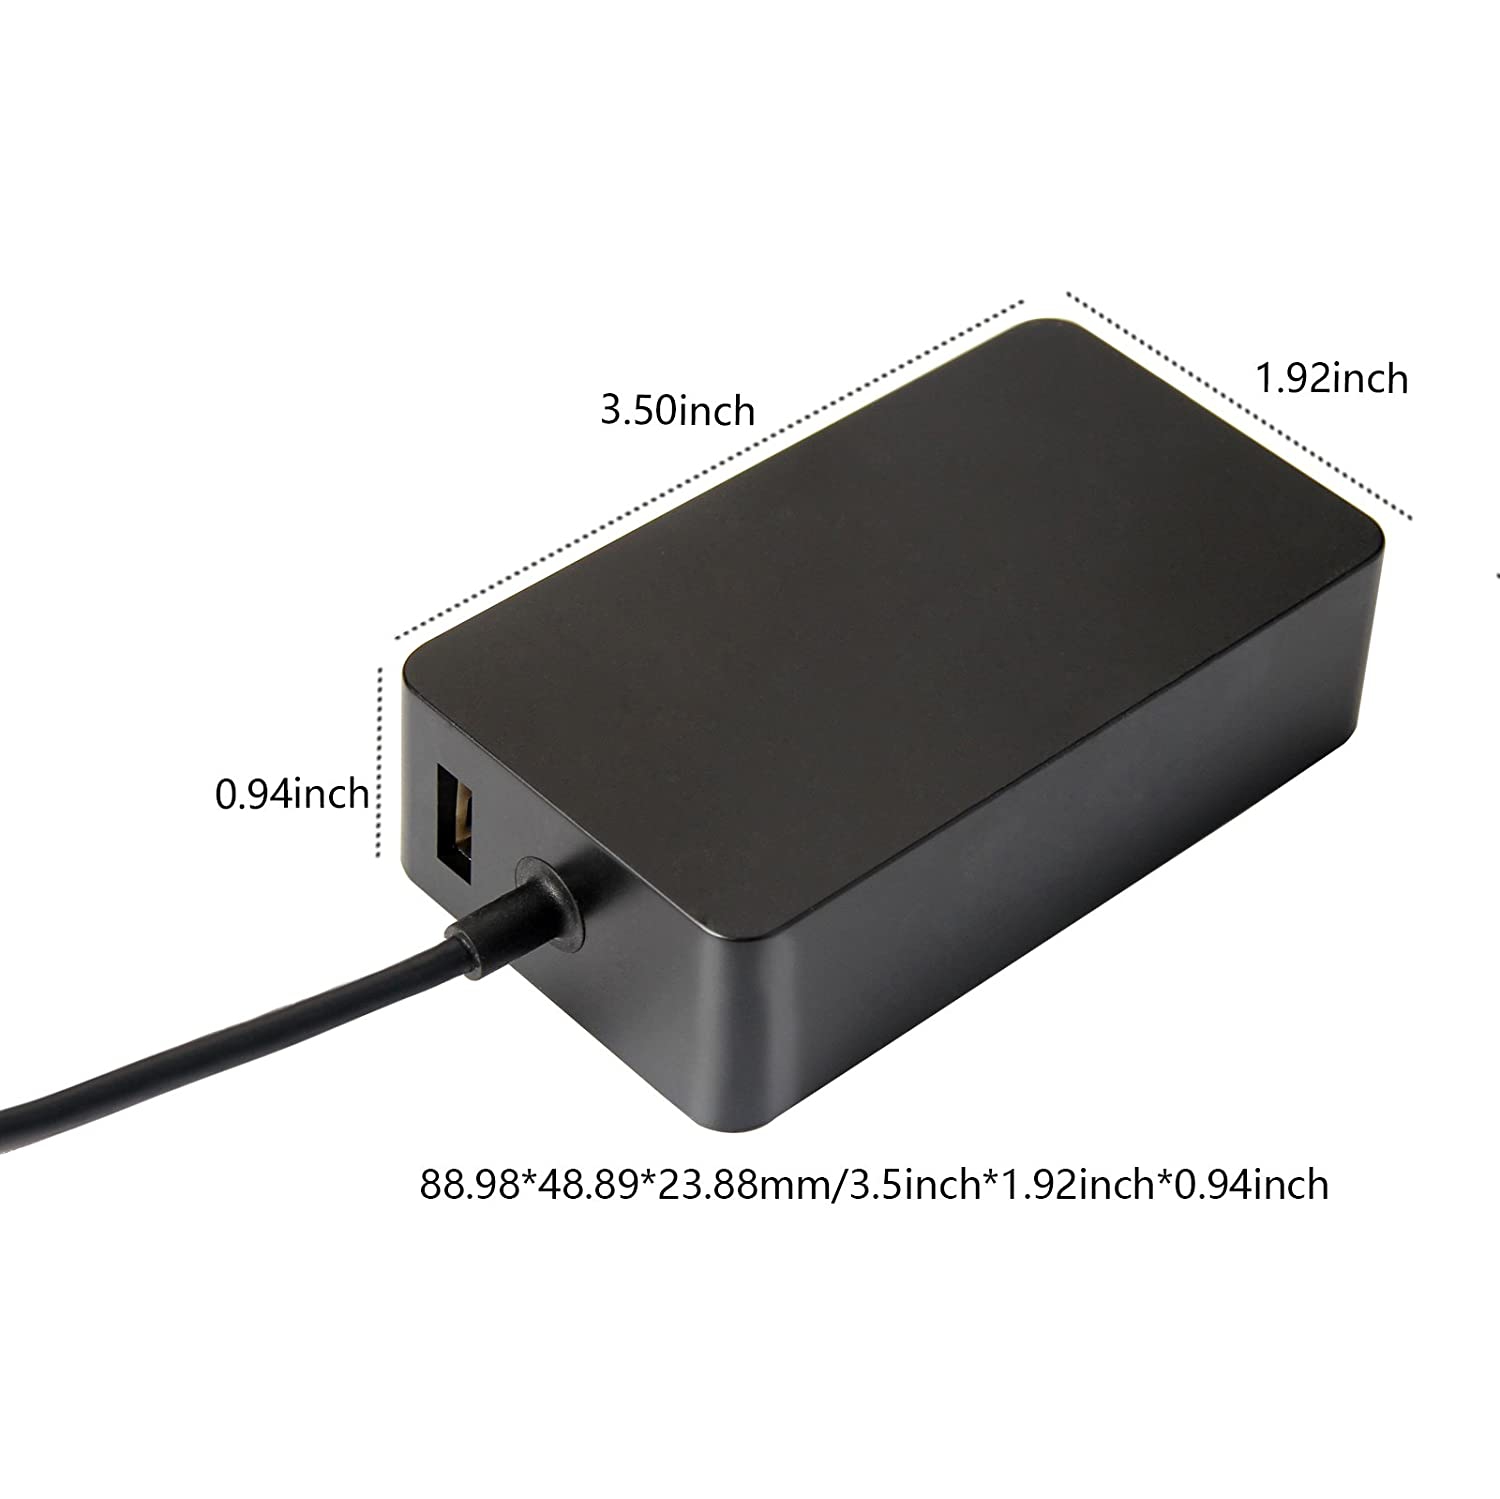 Surface Pro 5/4/3 Charger 36W 12V 2.58A Power Supply Adapter for Microsoft Windows New Surface Pro 5 Pro 4 Pro 3 i5 i7